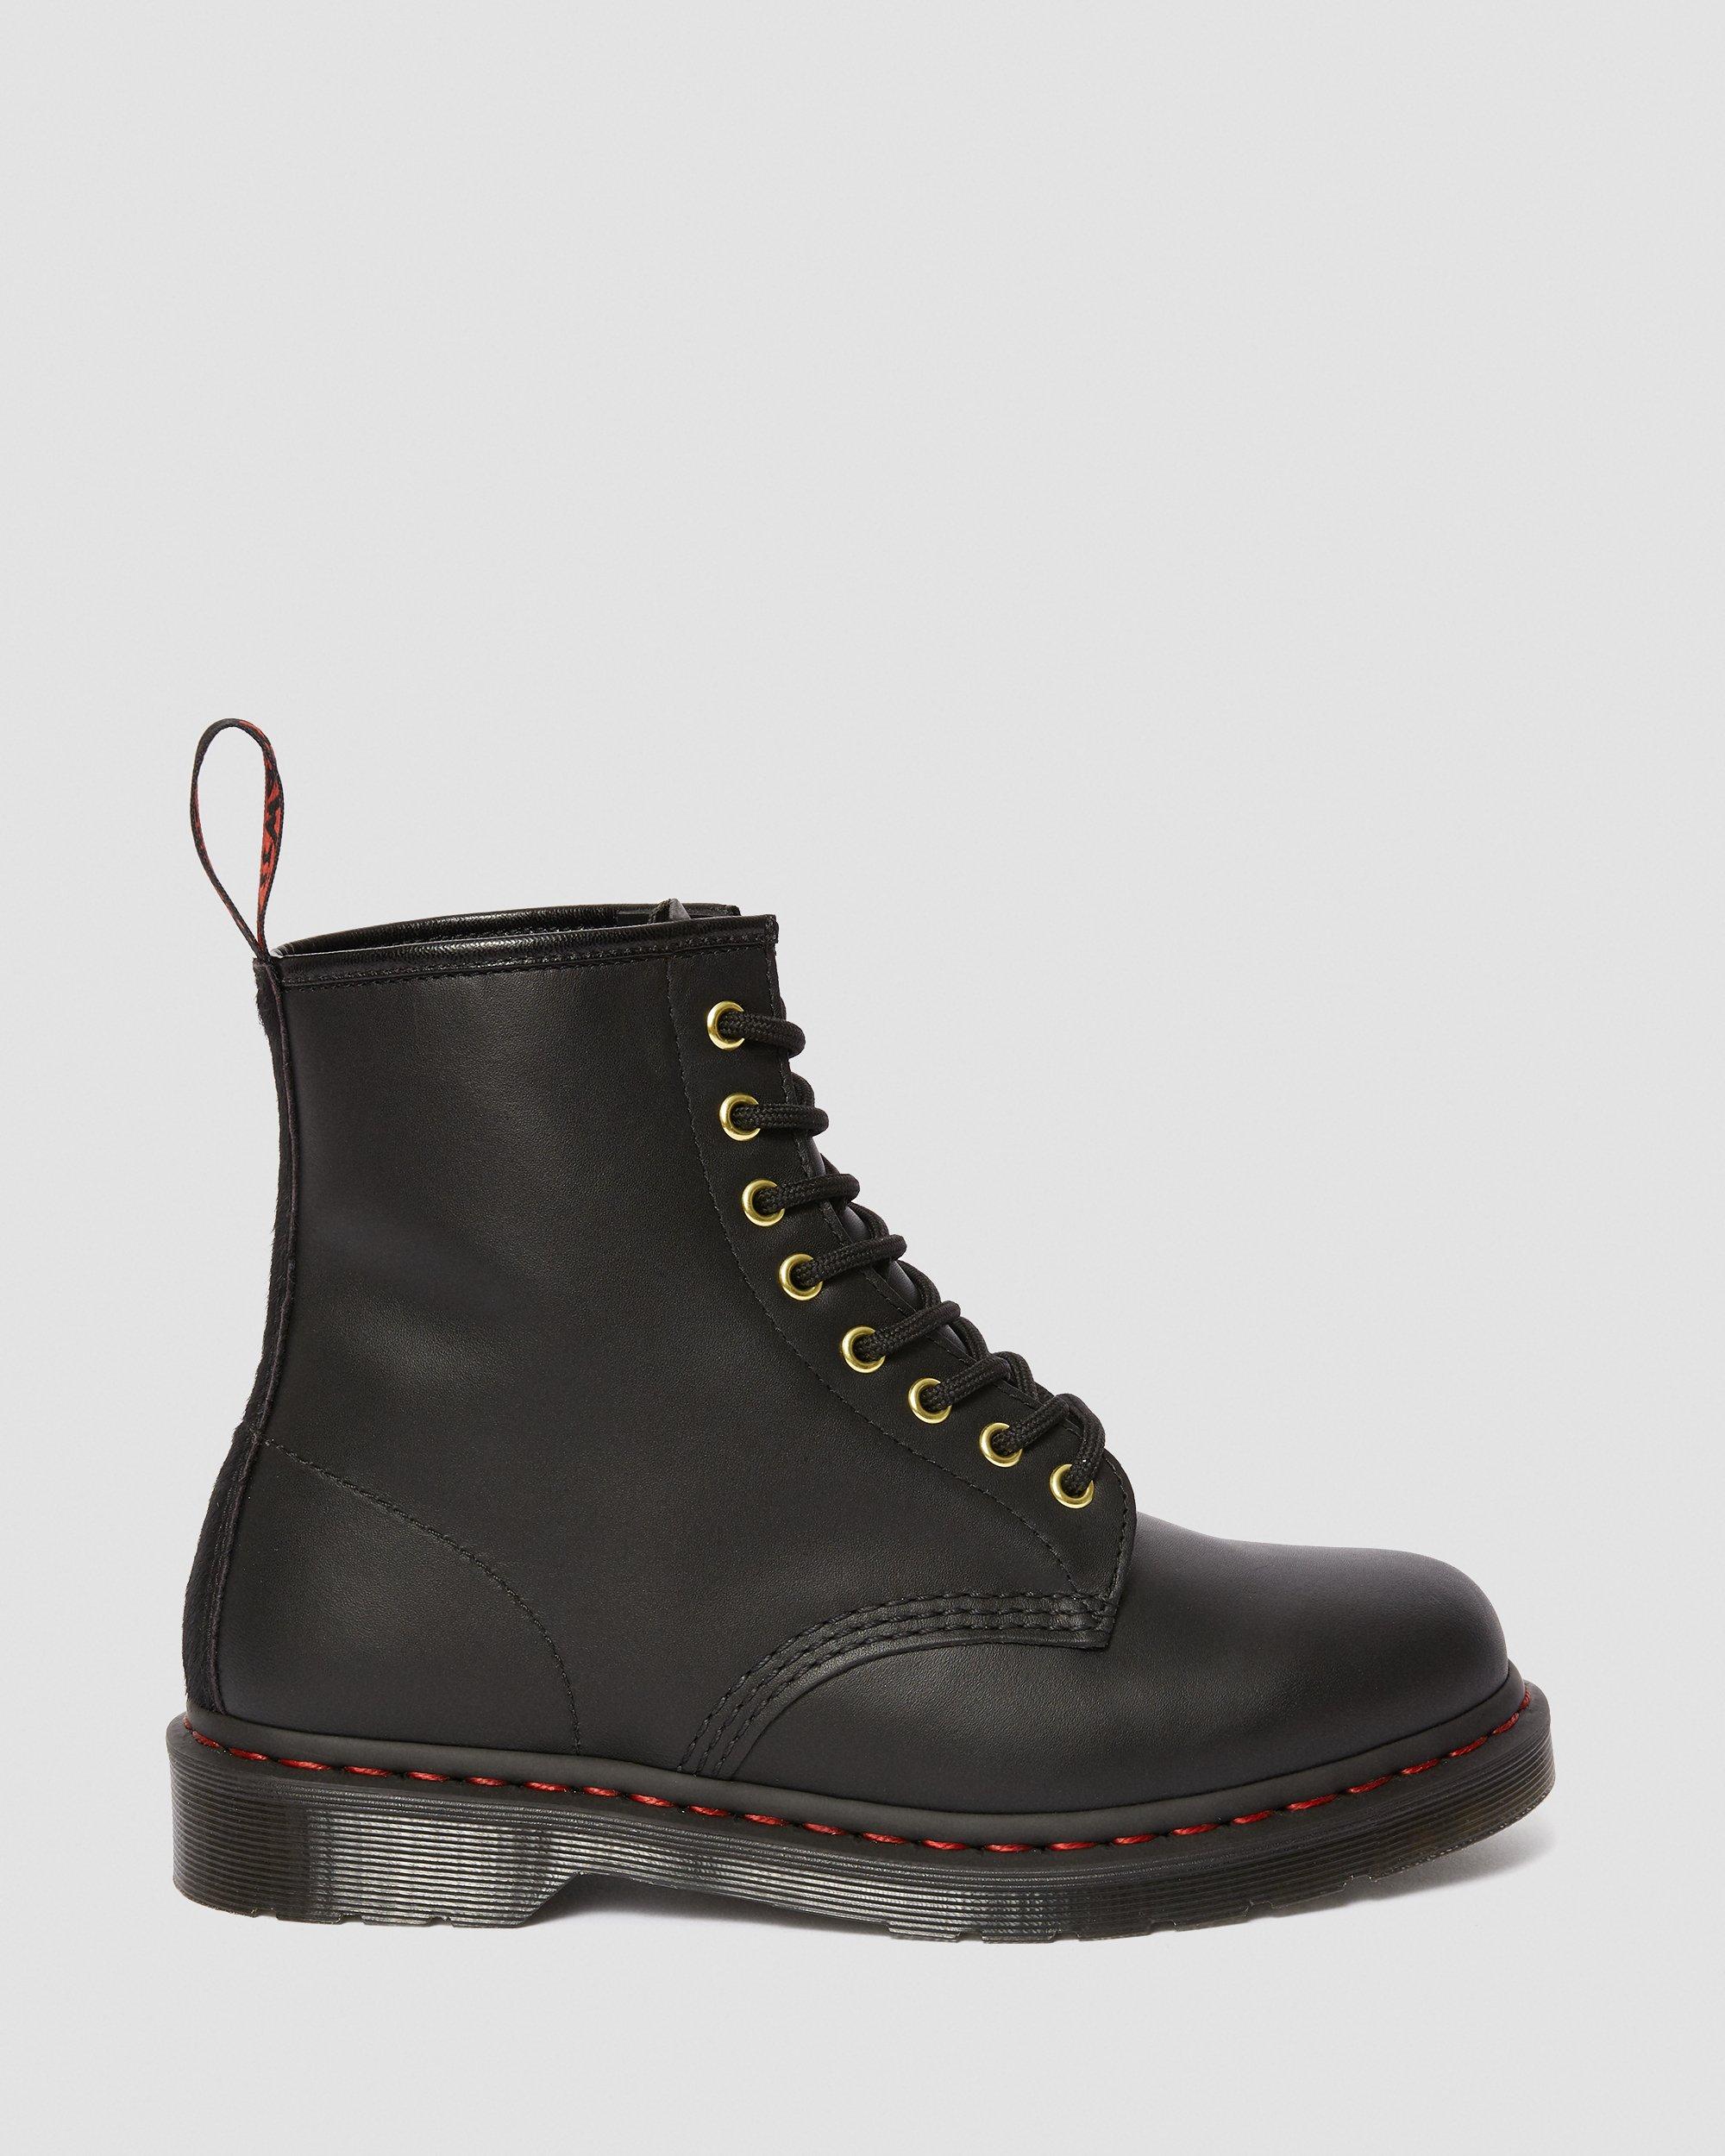 1460 CHINESE NEW YEAR LEATHER ANKLE BOOTS | Dr. Martens